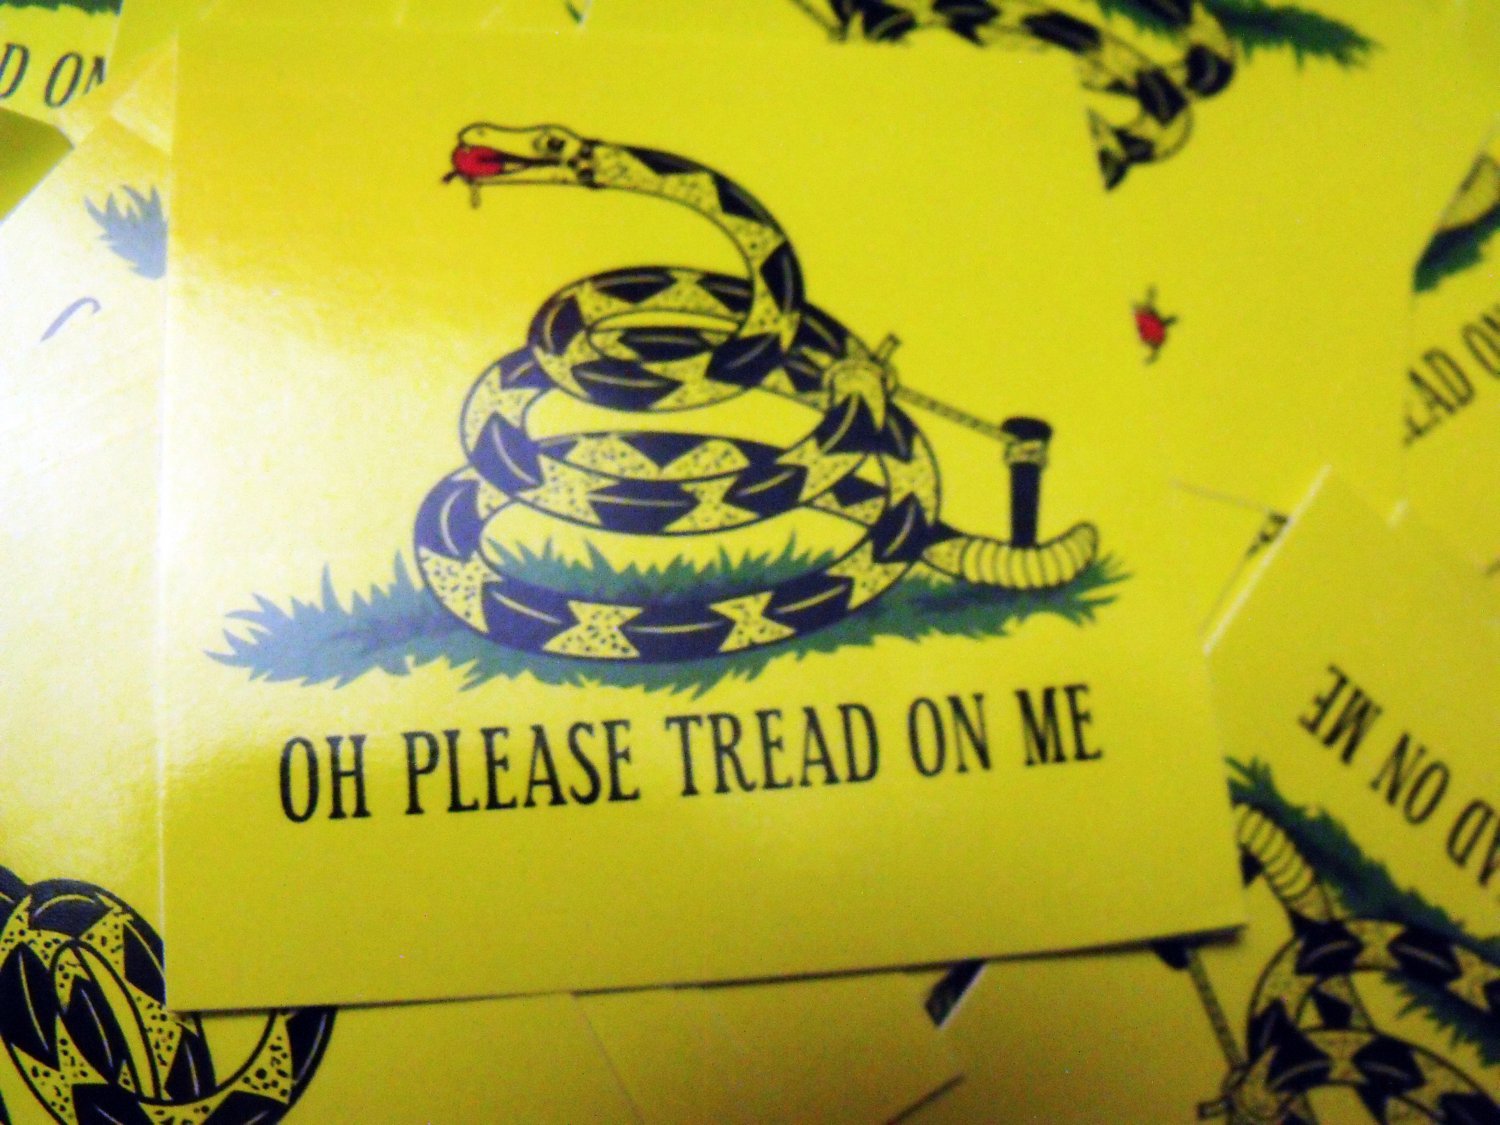 50 OH PLeASE TReAD ON ME 2.5" x 2.5" stickers